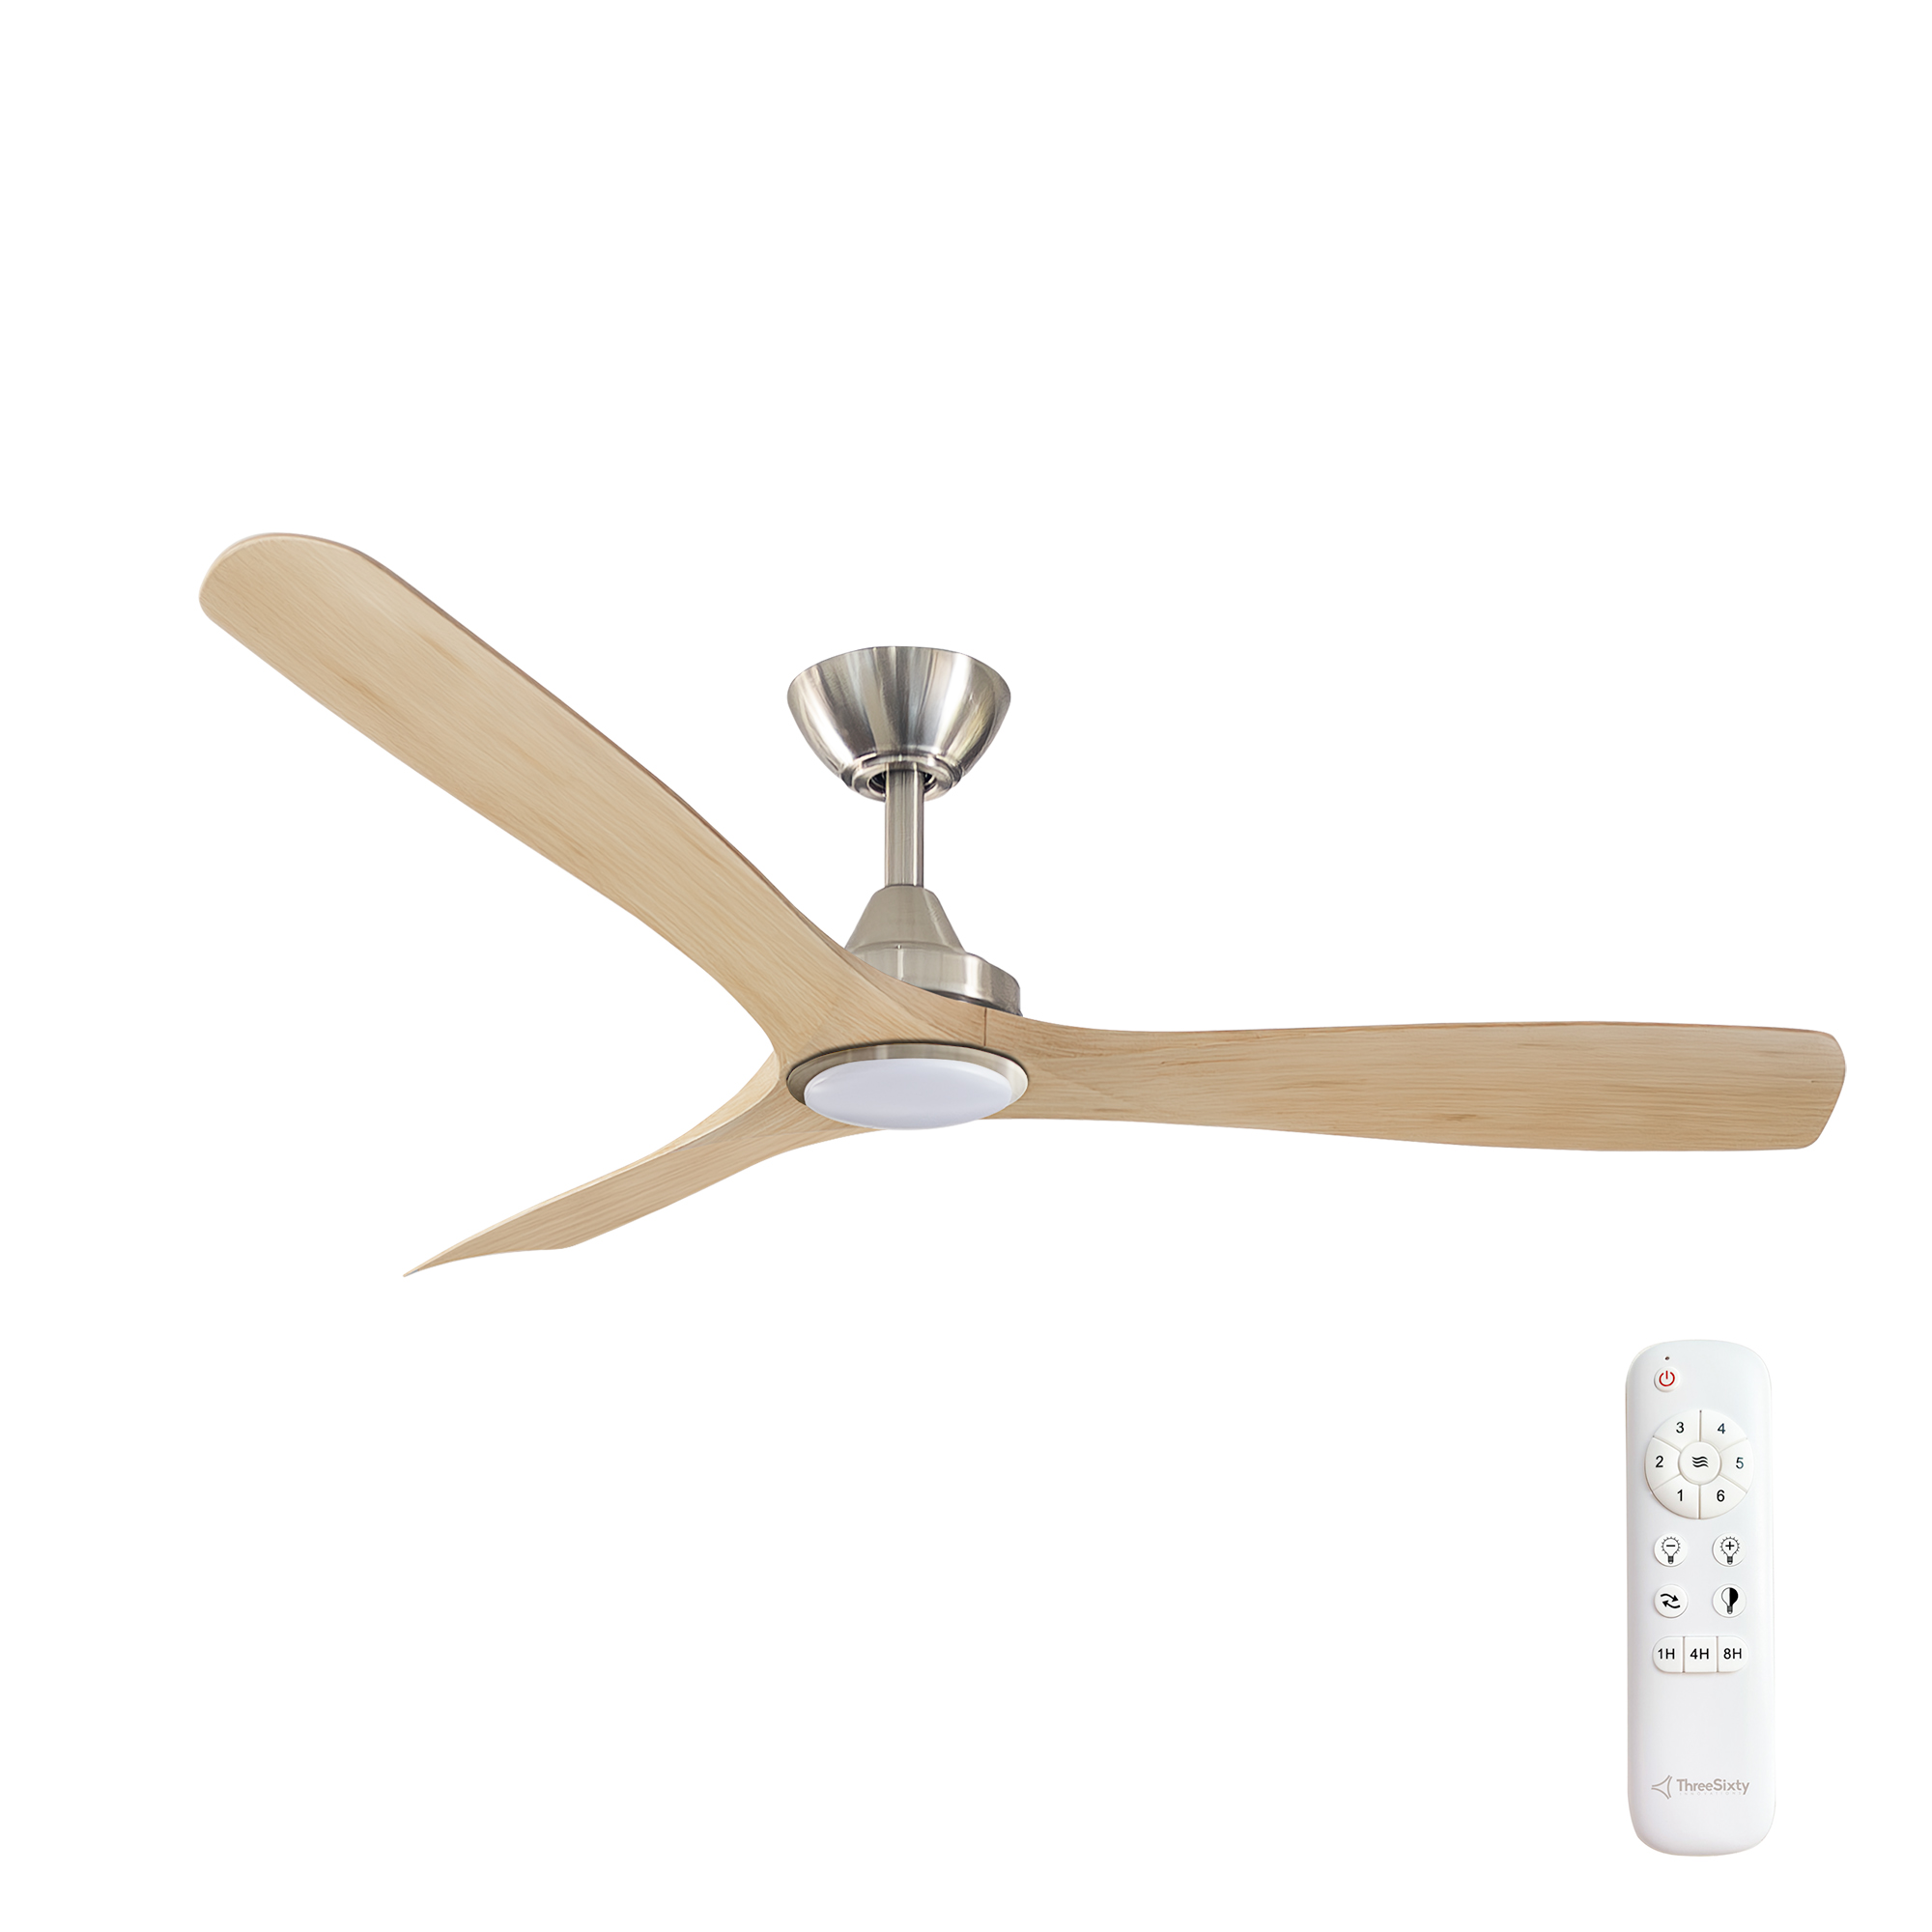 52" Spitfire DC Ceiling Fan in Brushed Nickel with Natural blades and 18W CCT LED Light